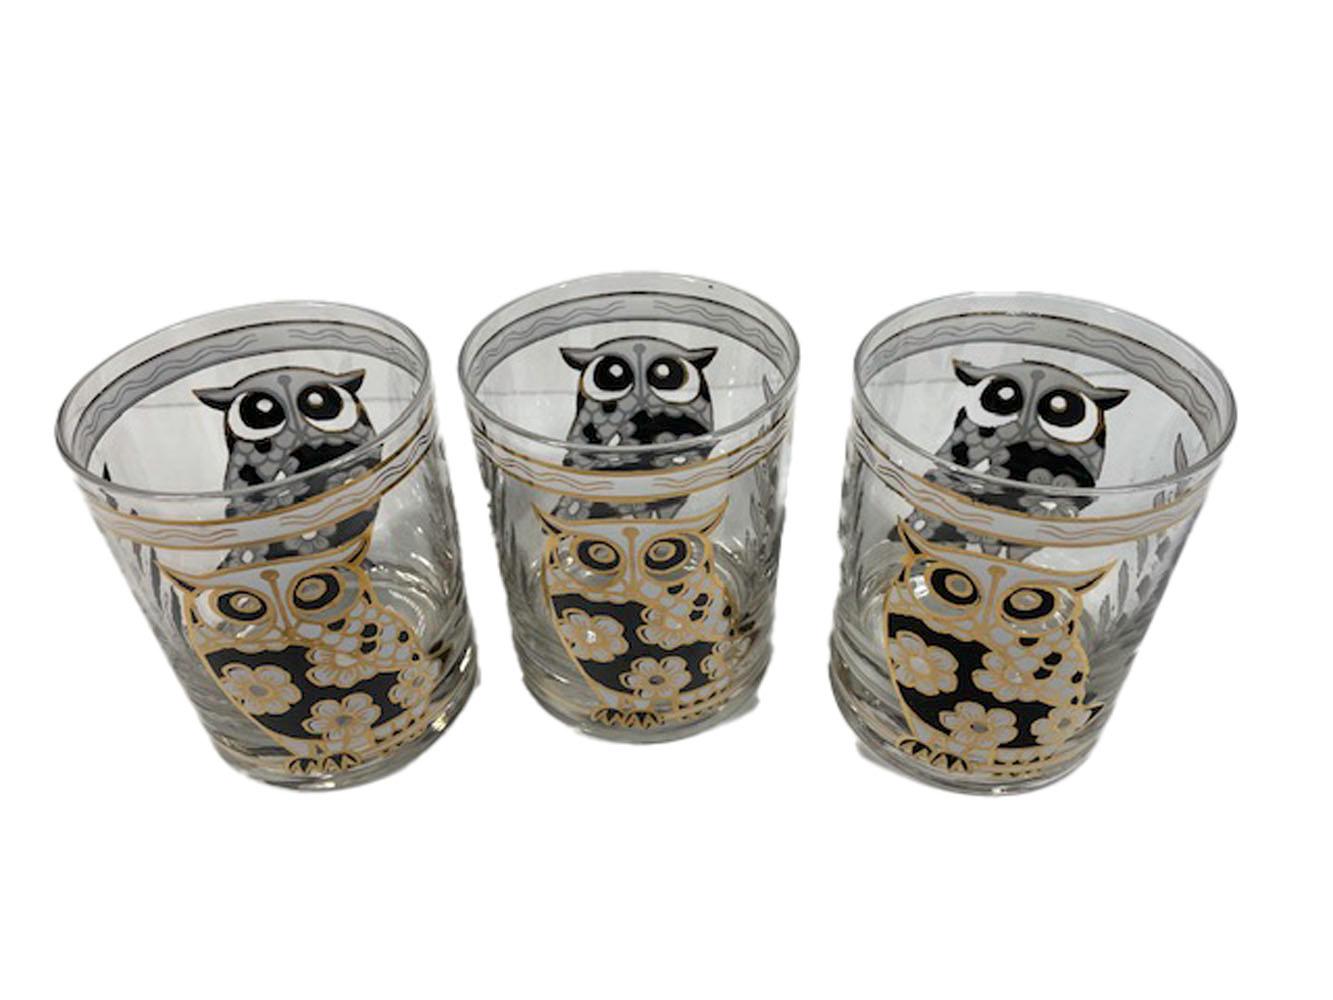 20th Century Six Cera Glass Rocks Glasses with Flower Patterned Owls in Black, White and Gold For Sale